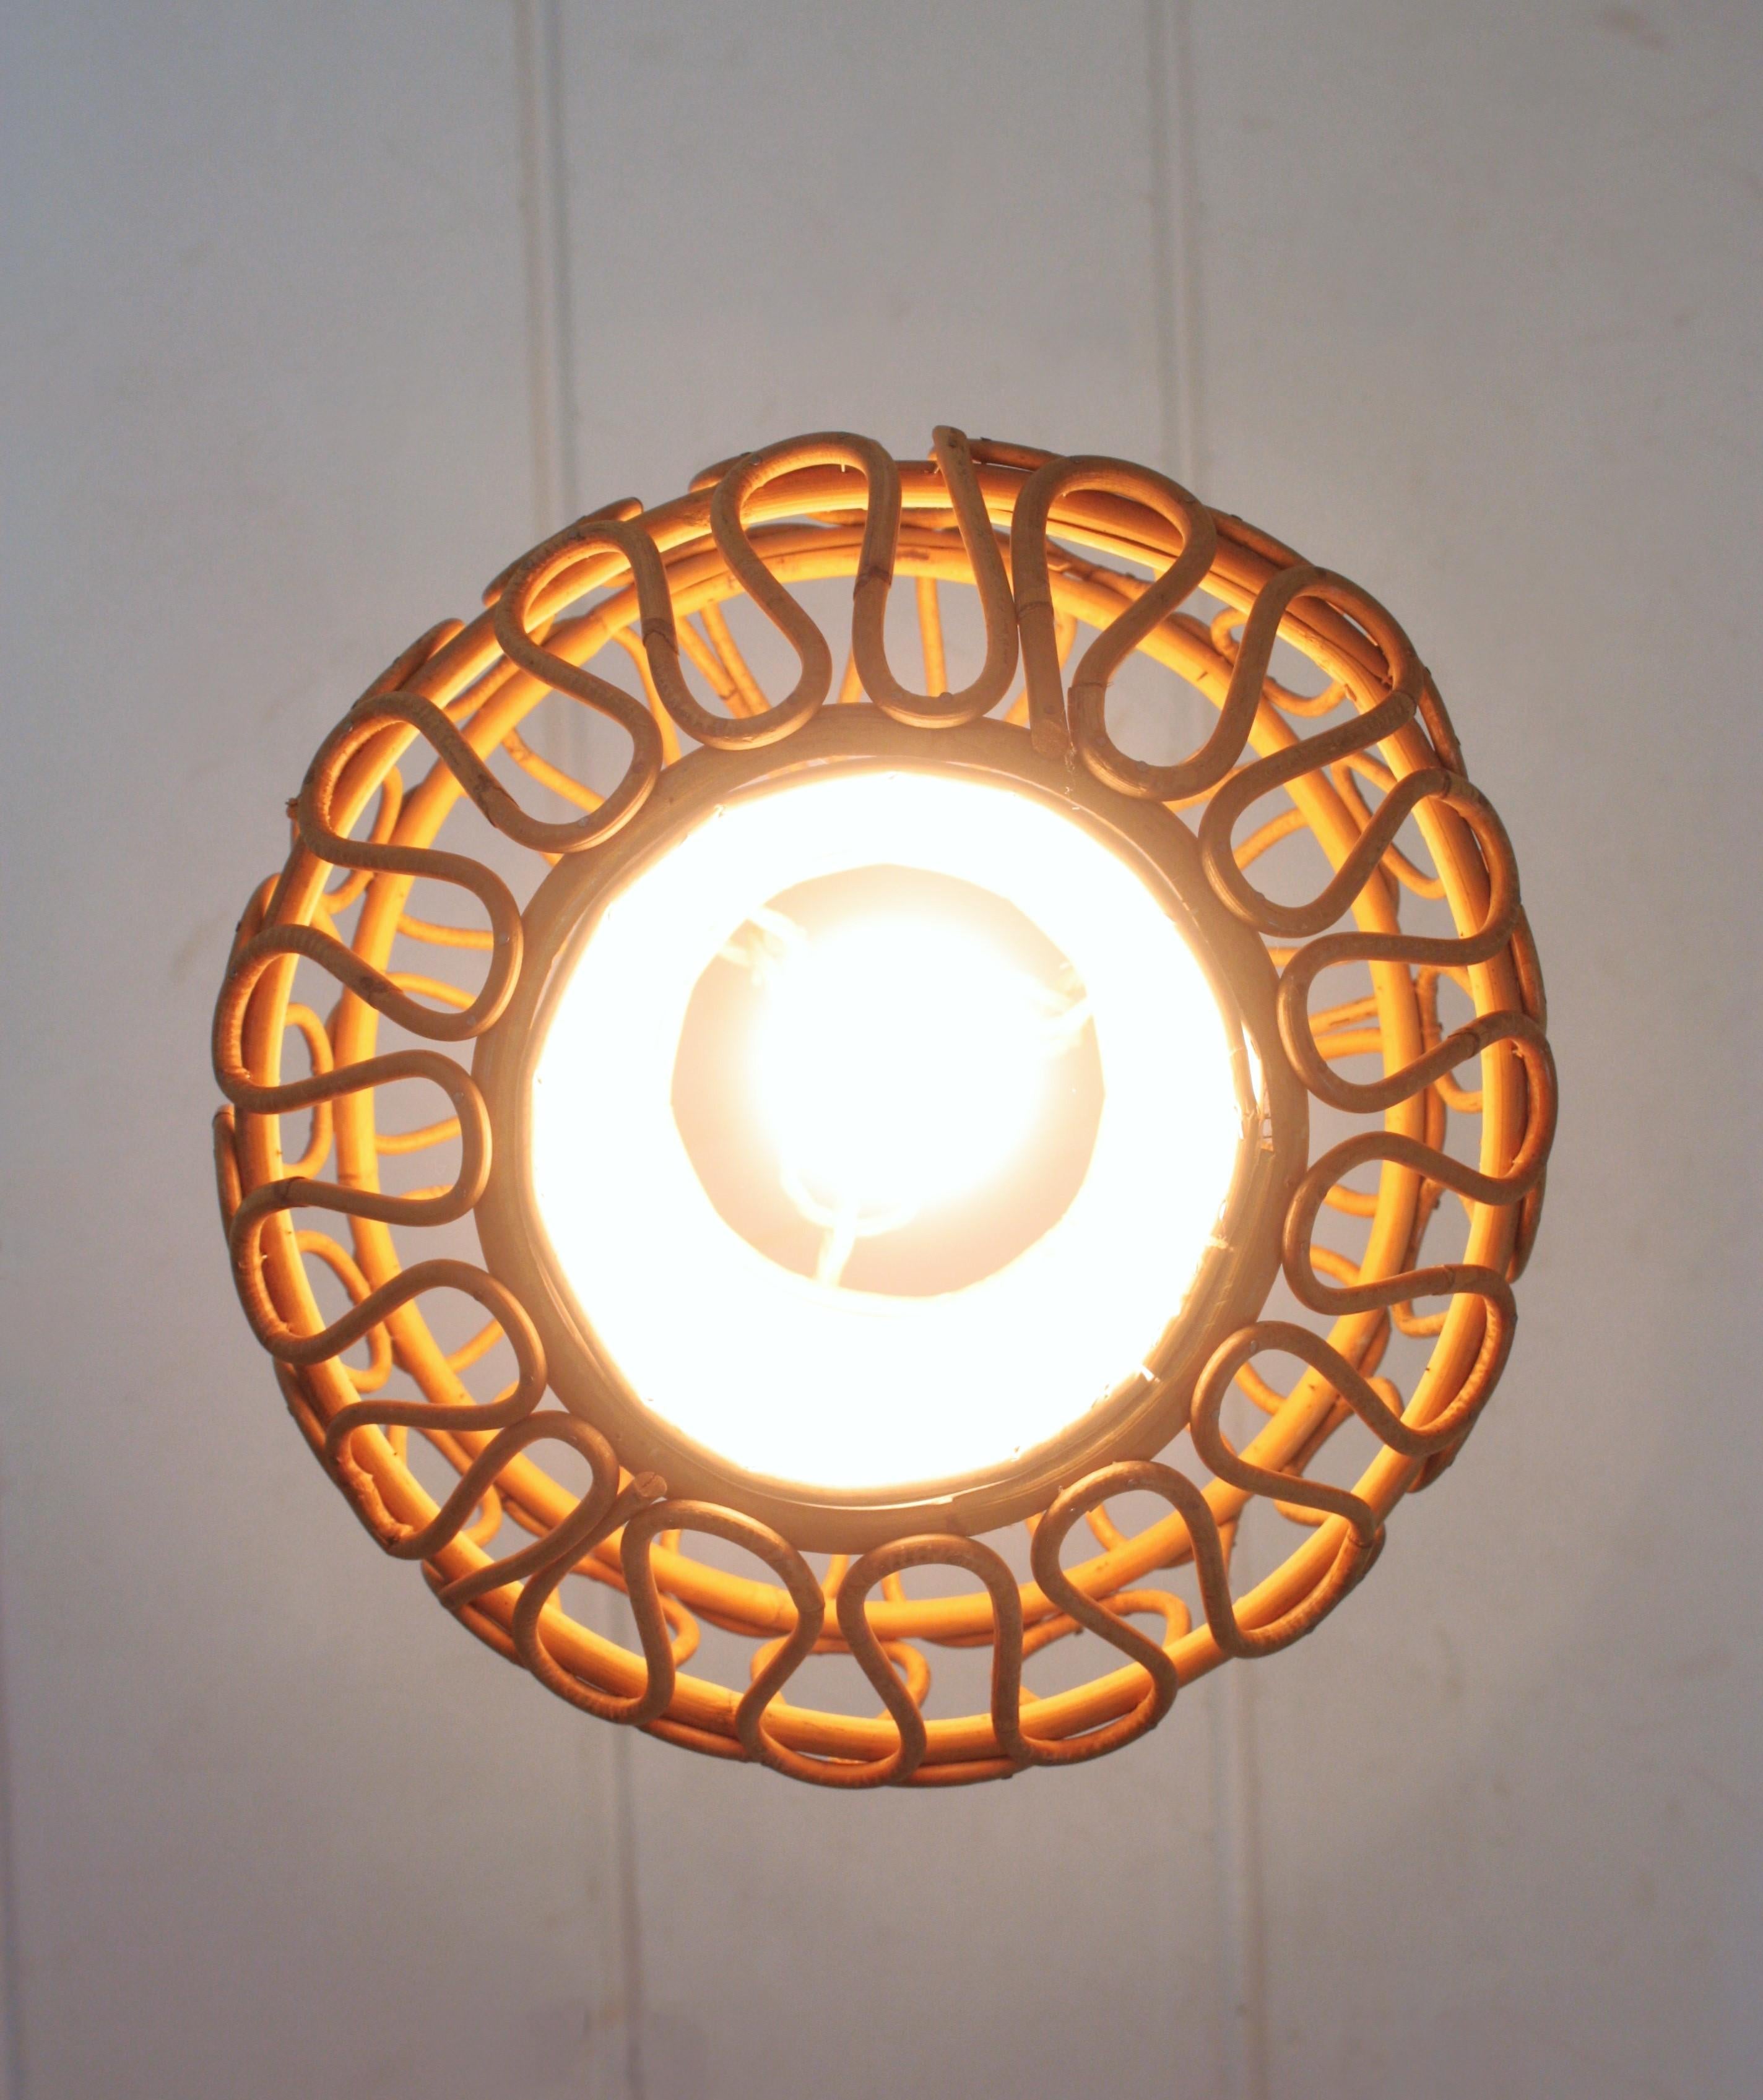 Rattan Globe Pendant Light or Lantern with Loop Details, Spain, 1960s For Sale 2